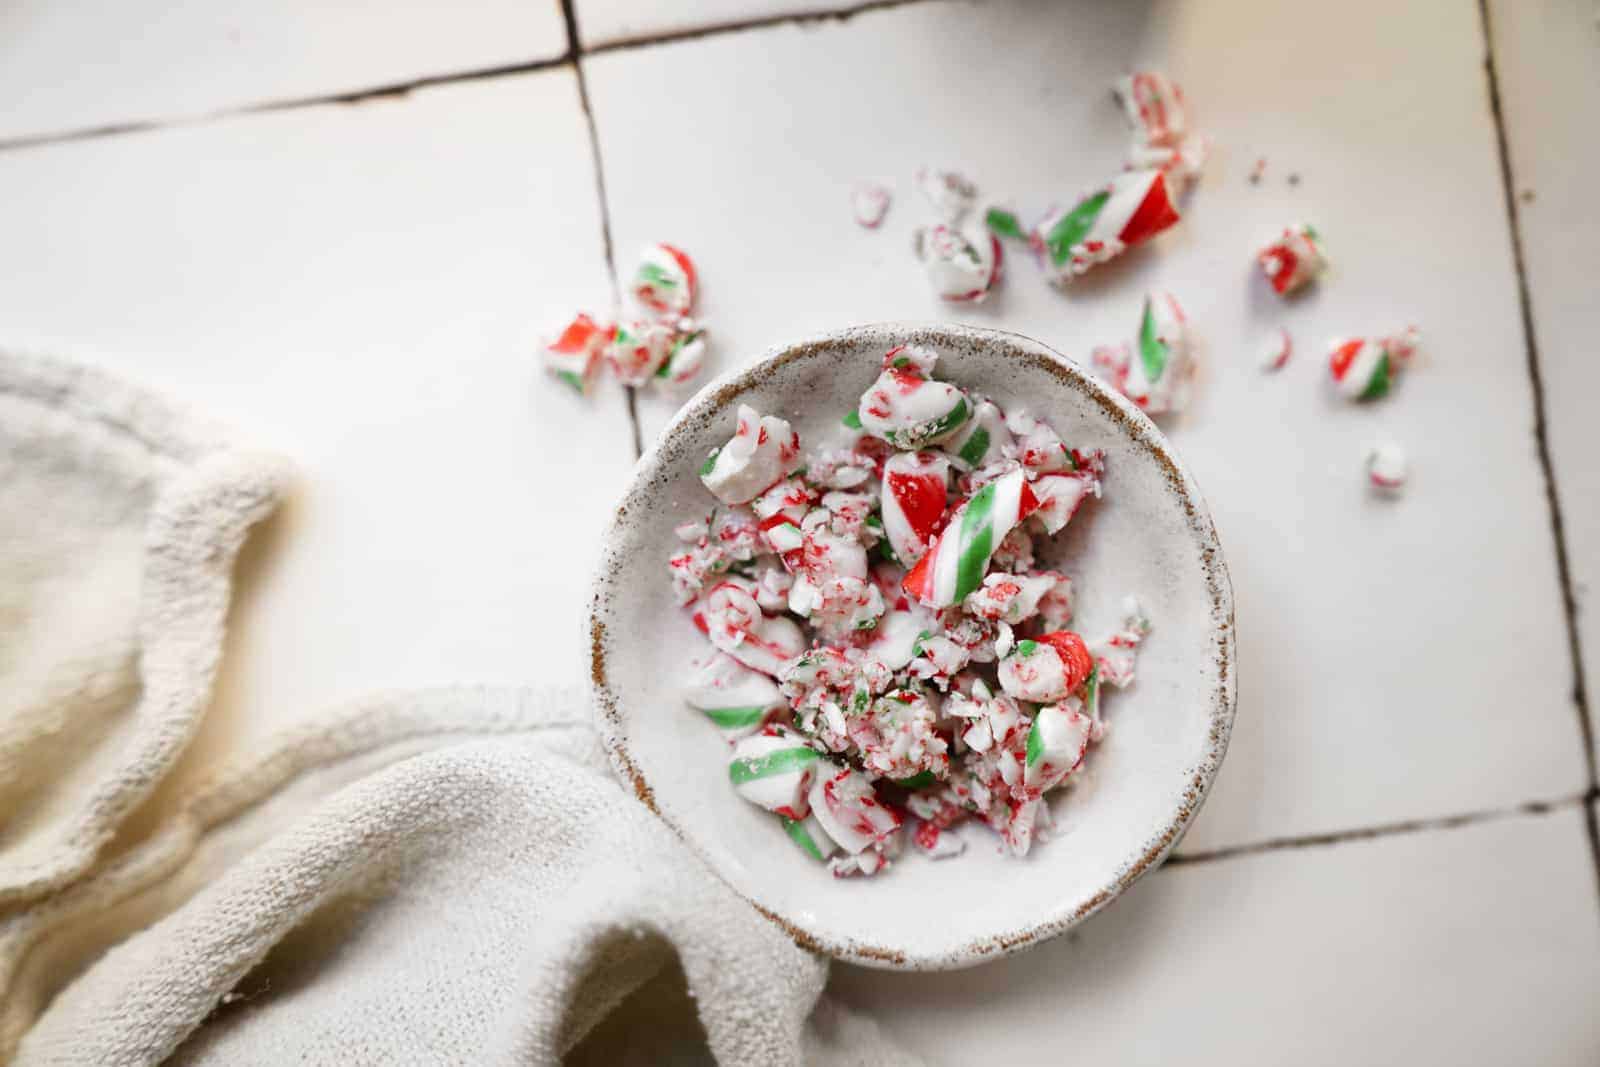 Sprinkled candy canes in a bowl.